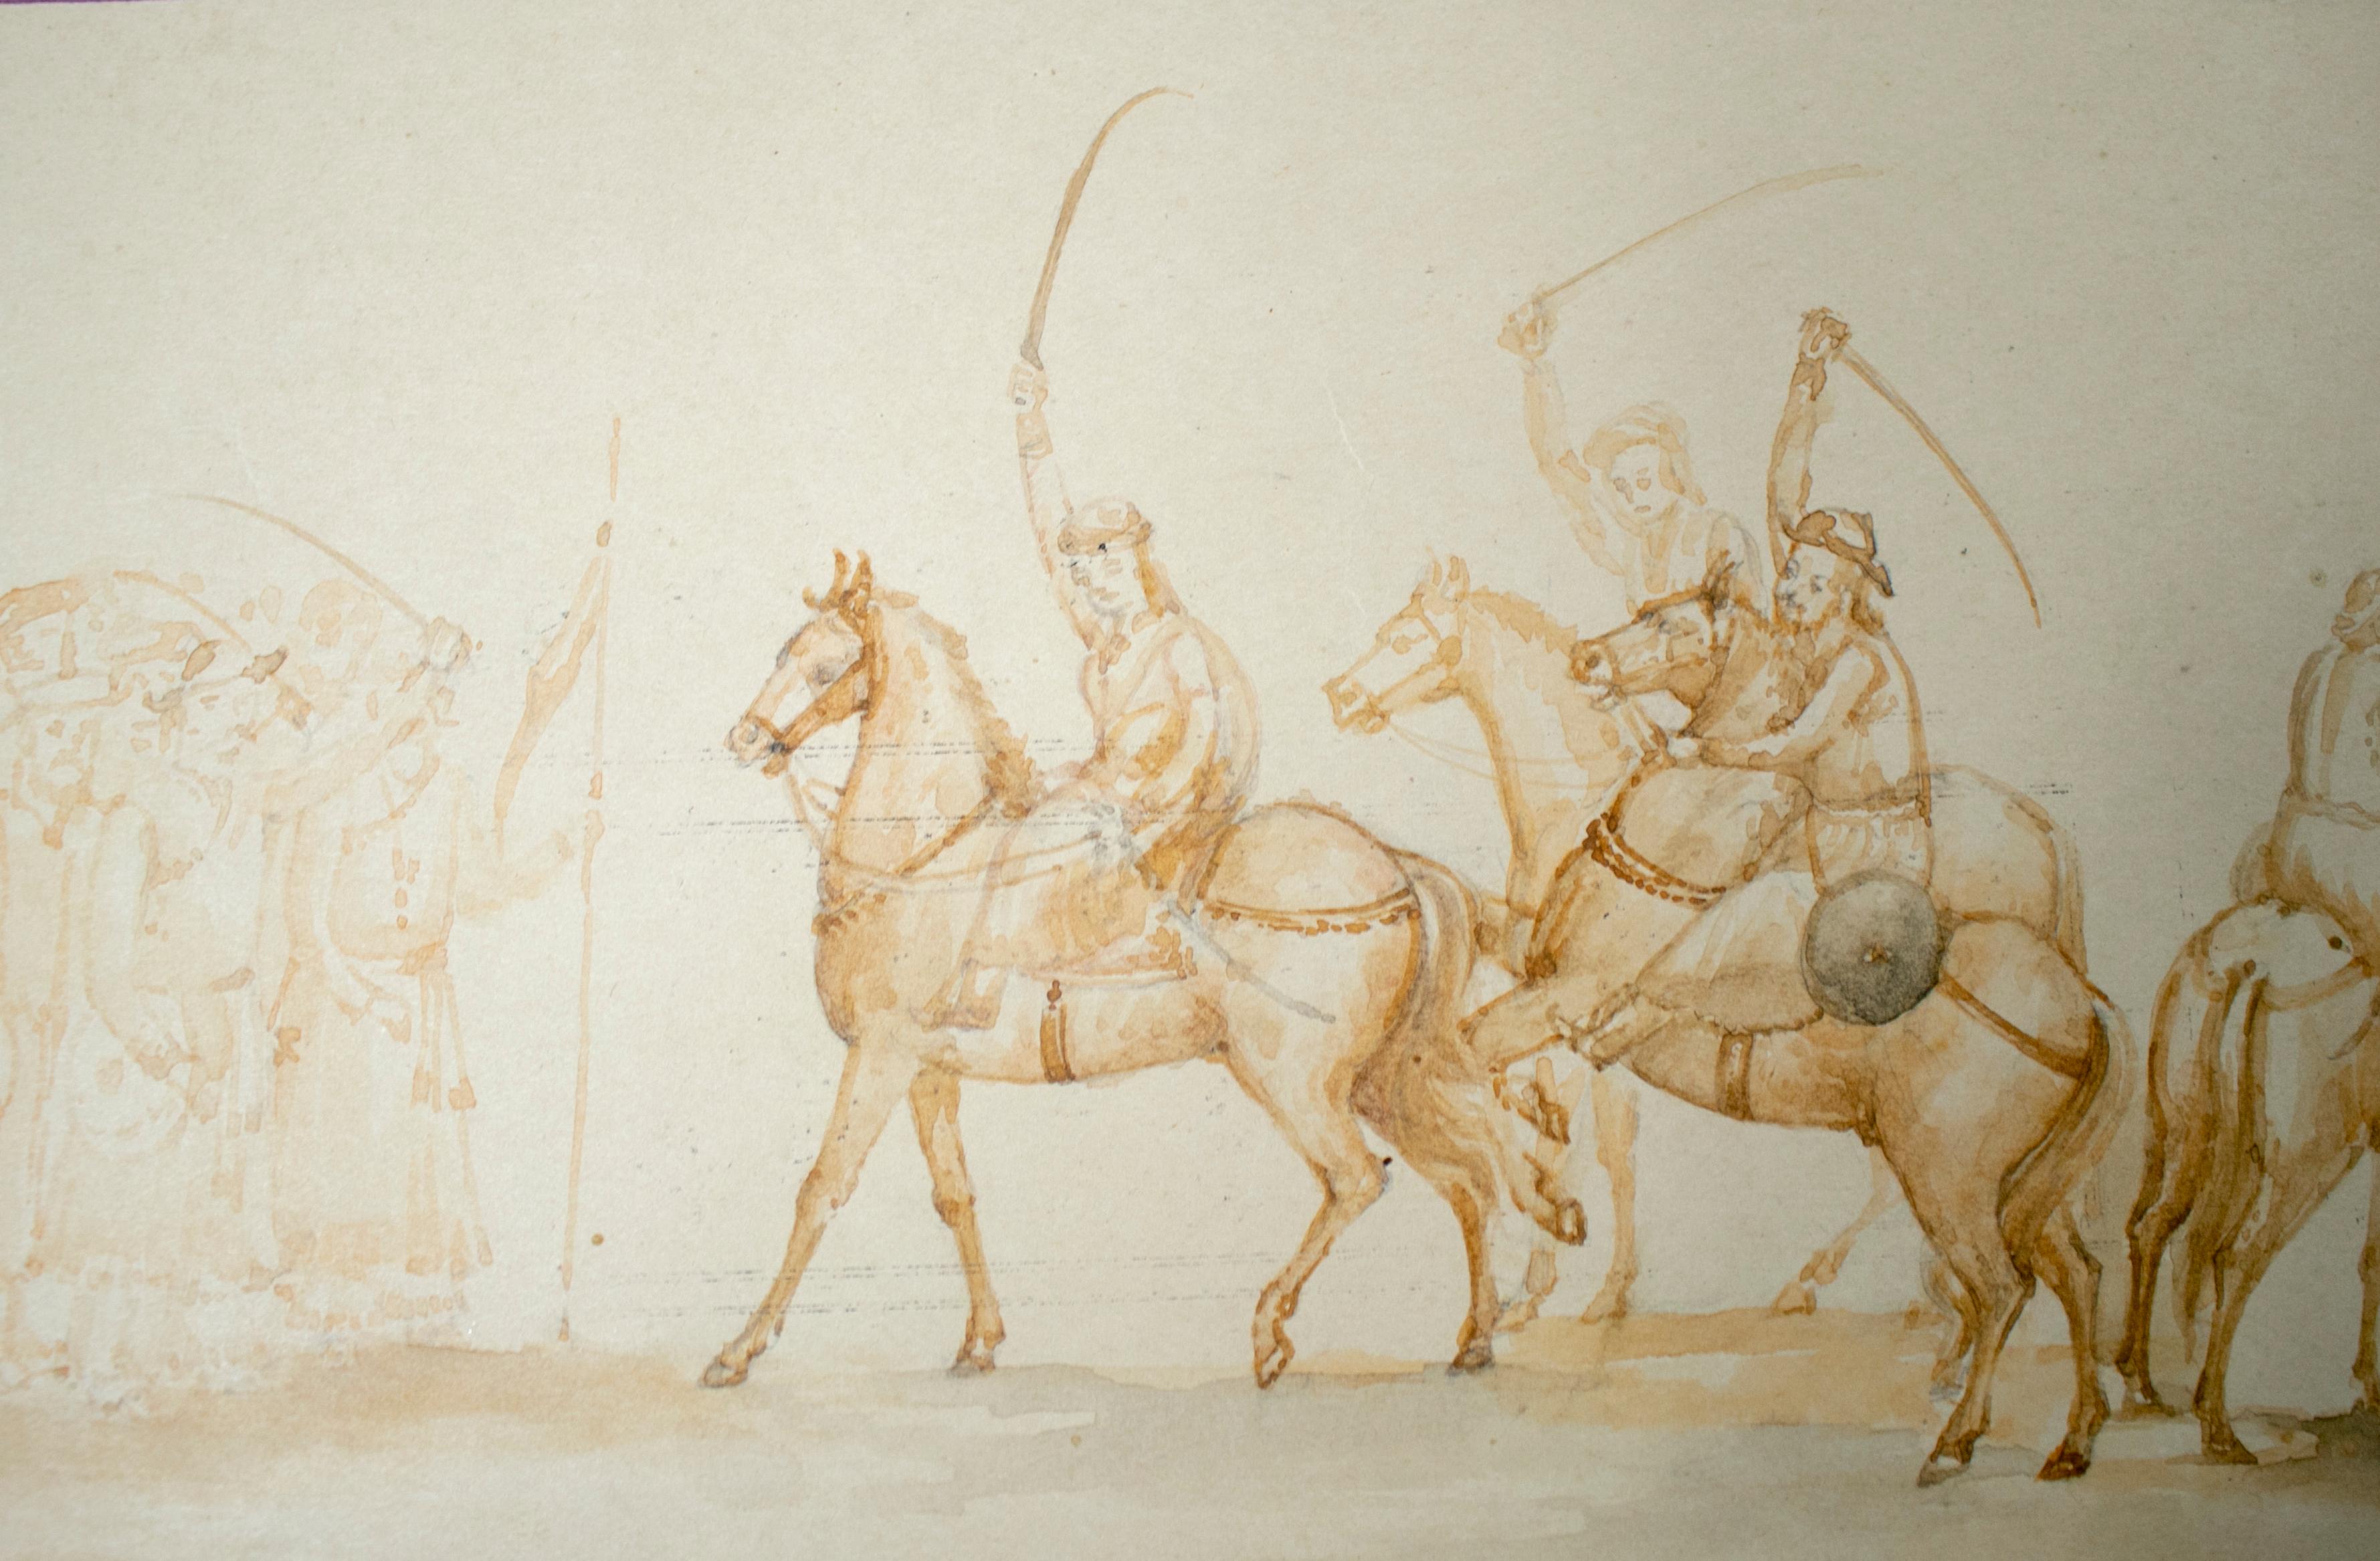 Hand-Painted 1970s Indian Mughal Gouache Paper Drawing Depicting Military Horsemen For Sale